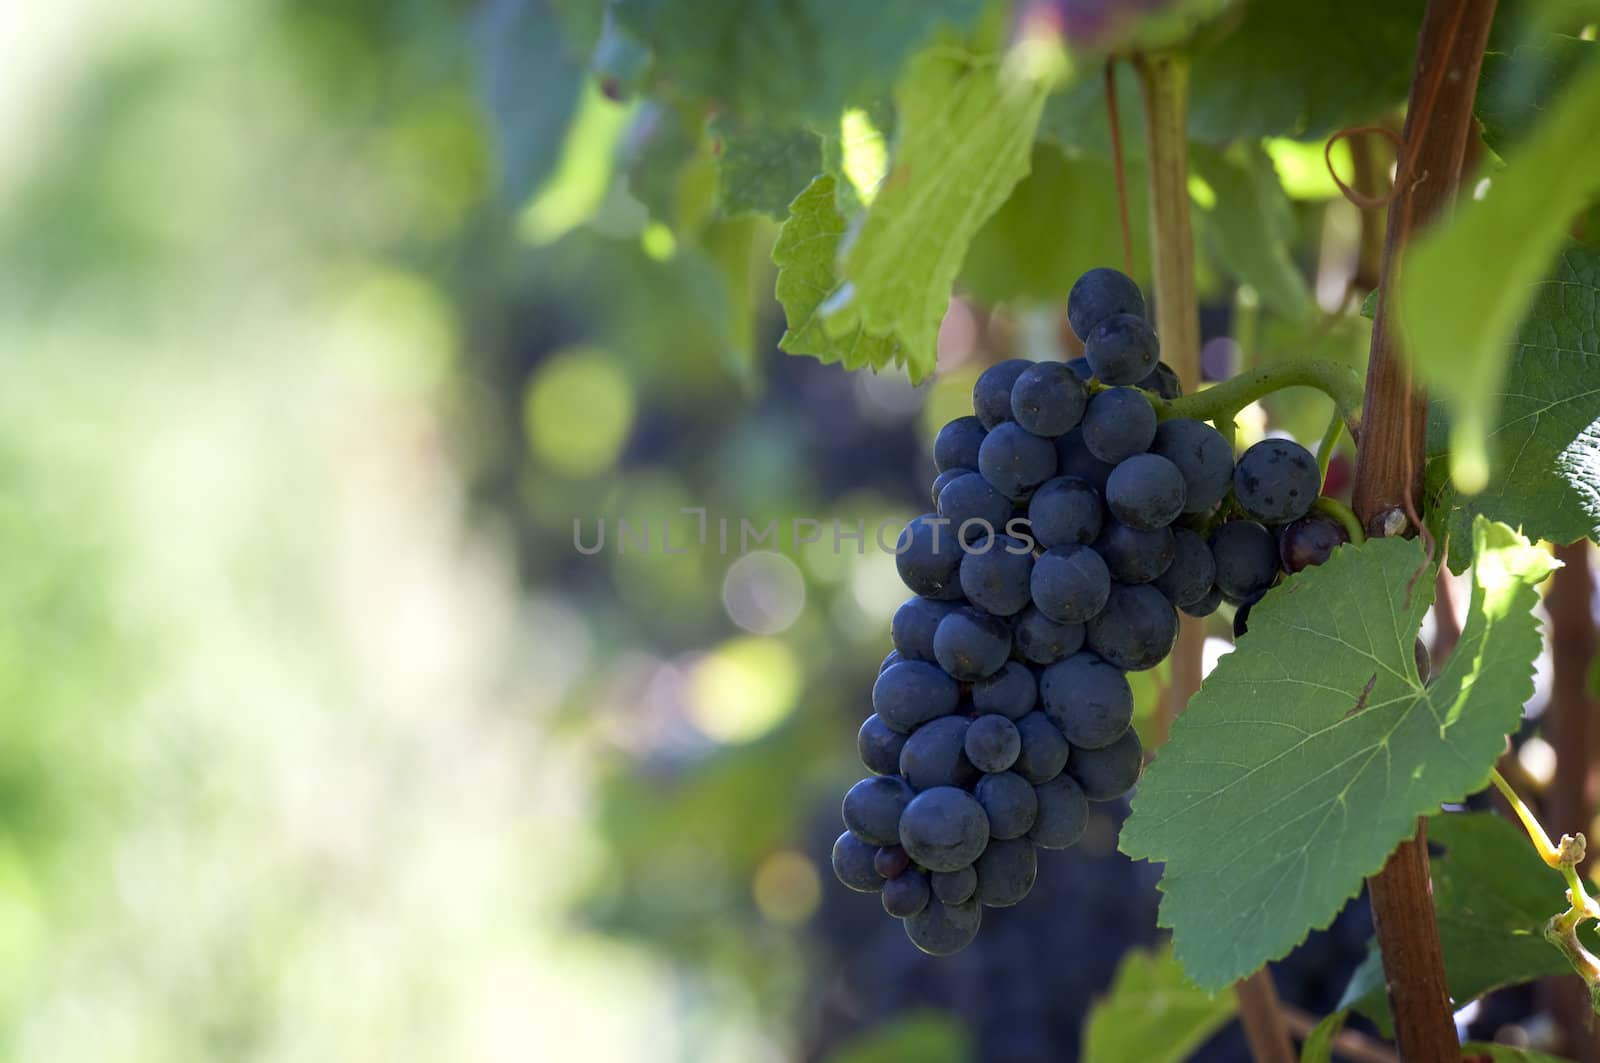 Red bunches of grape in the vineyard before the harvest